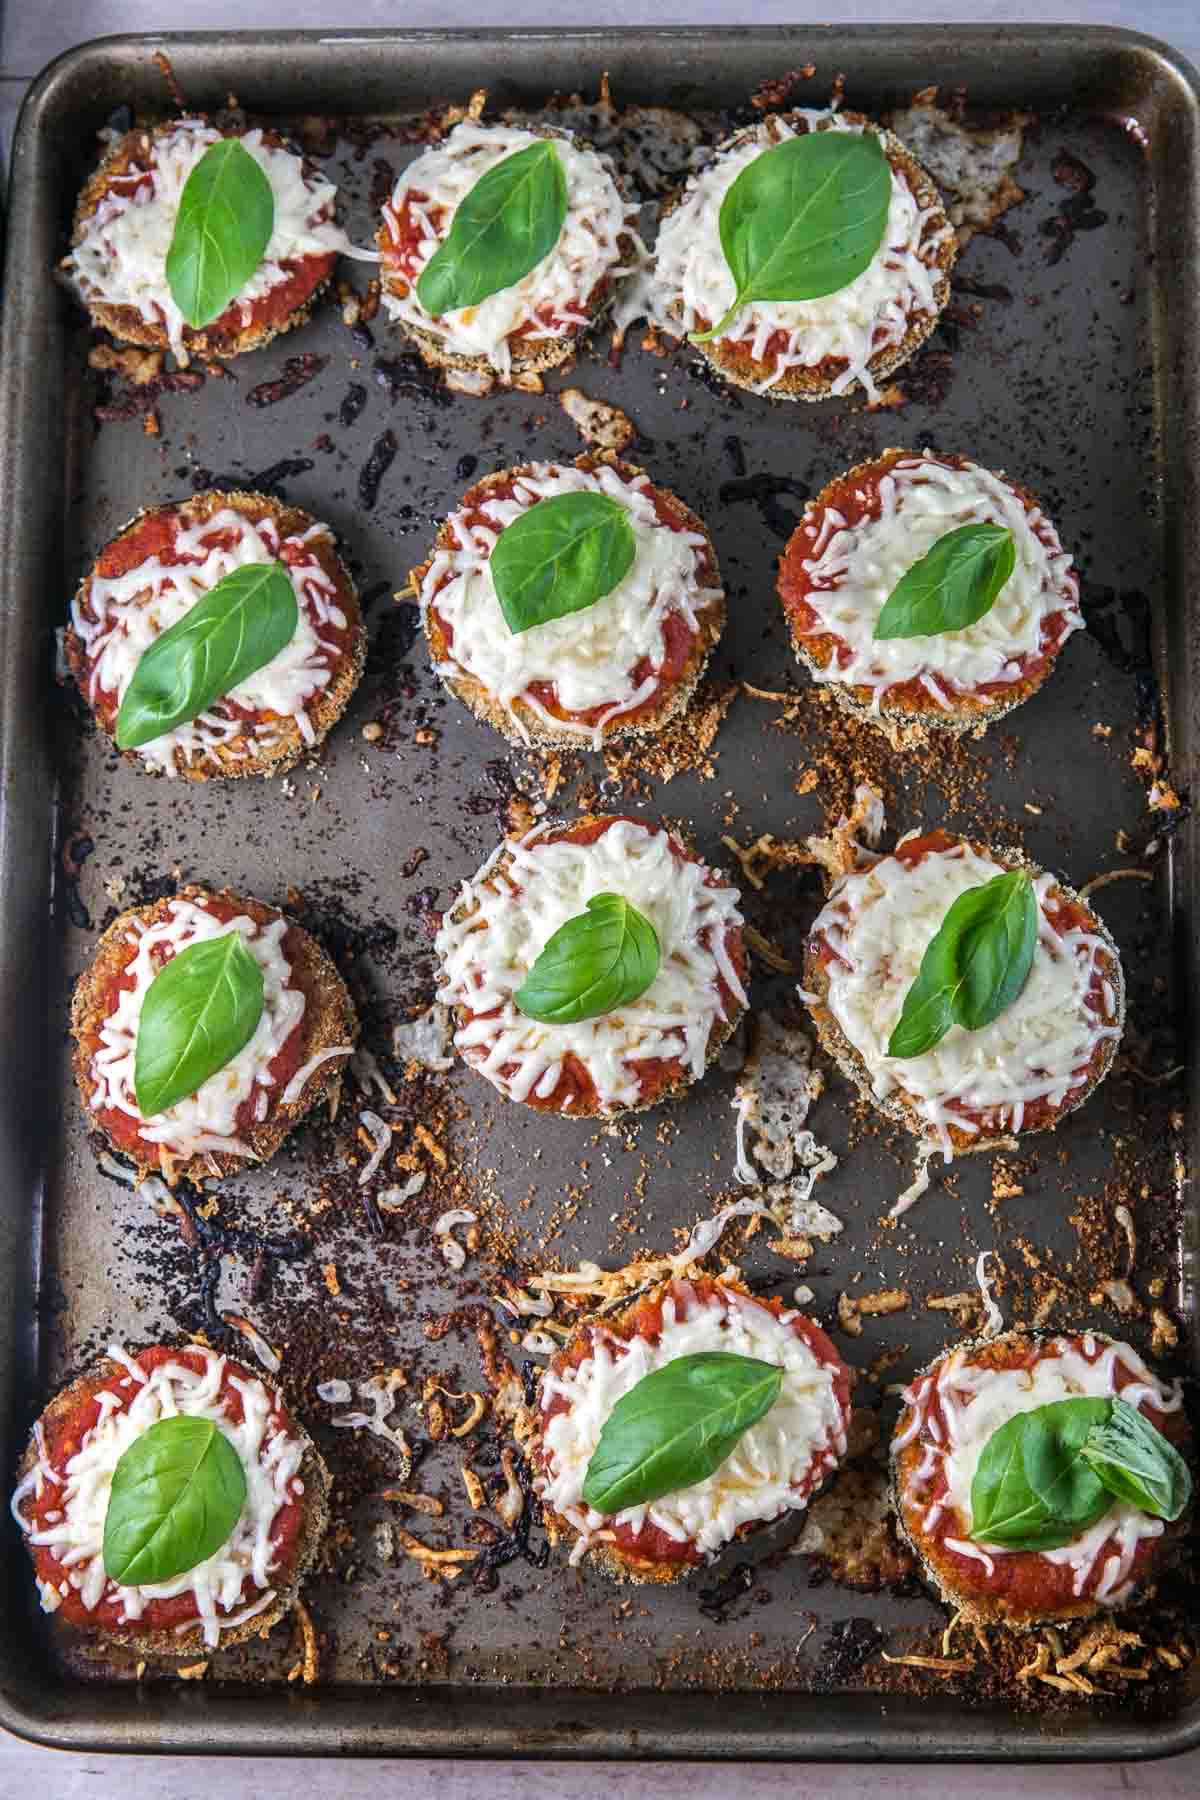 Sheet Pan Eggplant Parmesan: make a classic Italian dish healthier and quick with this weeknight-friendly baked sheet pan dinner and a side of turkey meatballs. Skip frying and bake instead! {Bunsen Burner Bakery} #eggplantparm #sheetpan #dinner